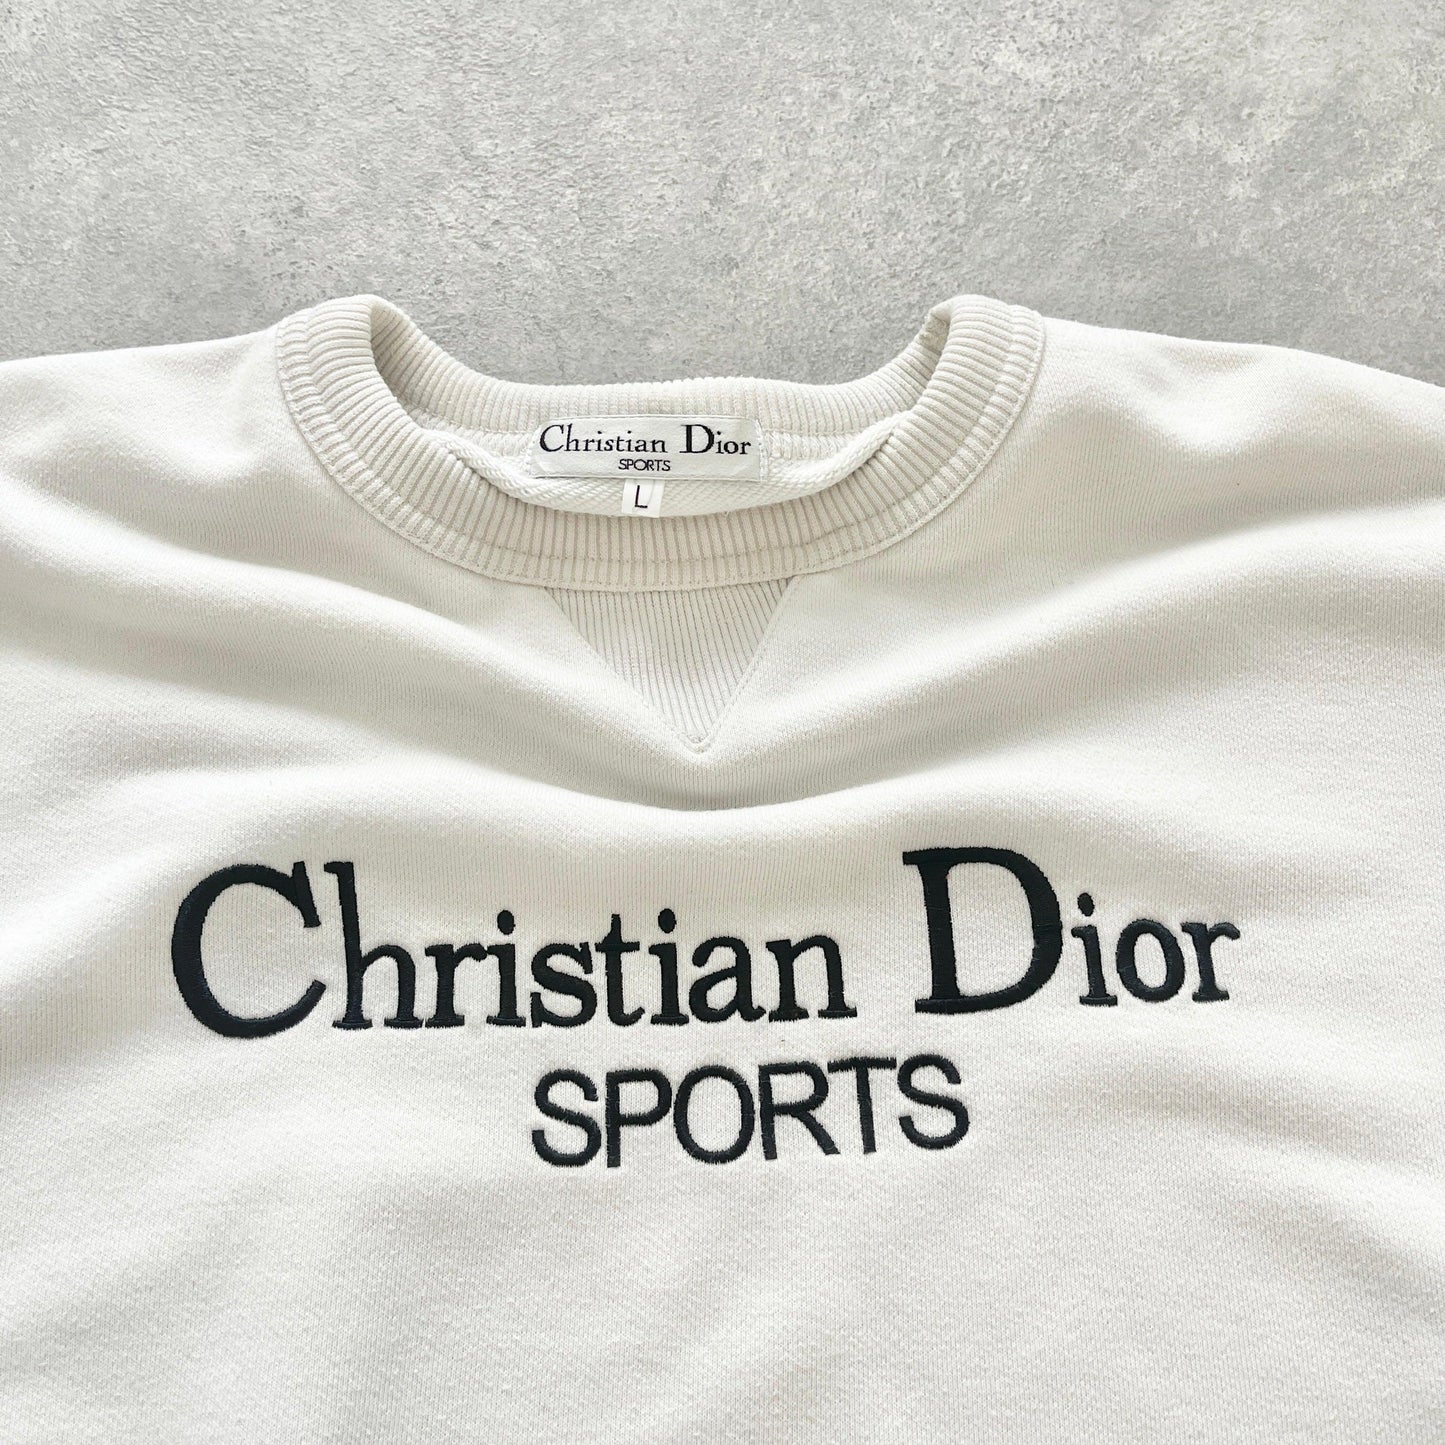 Christian Dior Sports 1990s heavyweight embroidered sweatshirt (M) - Known Source